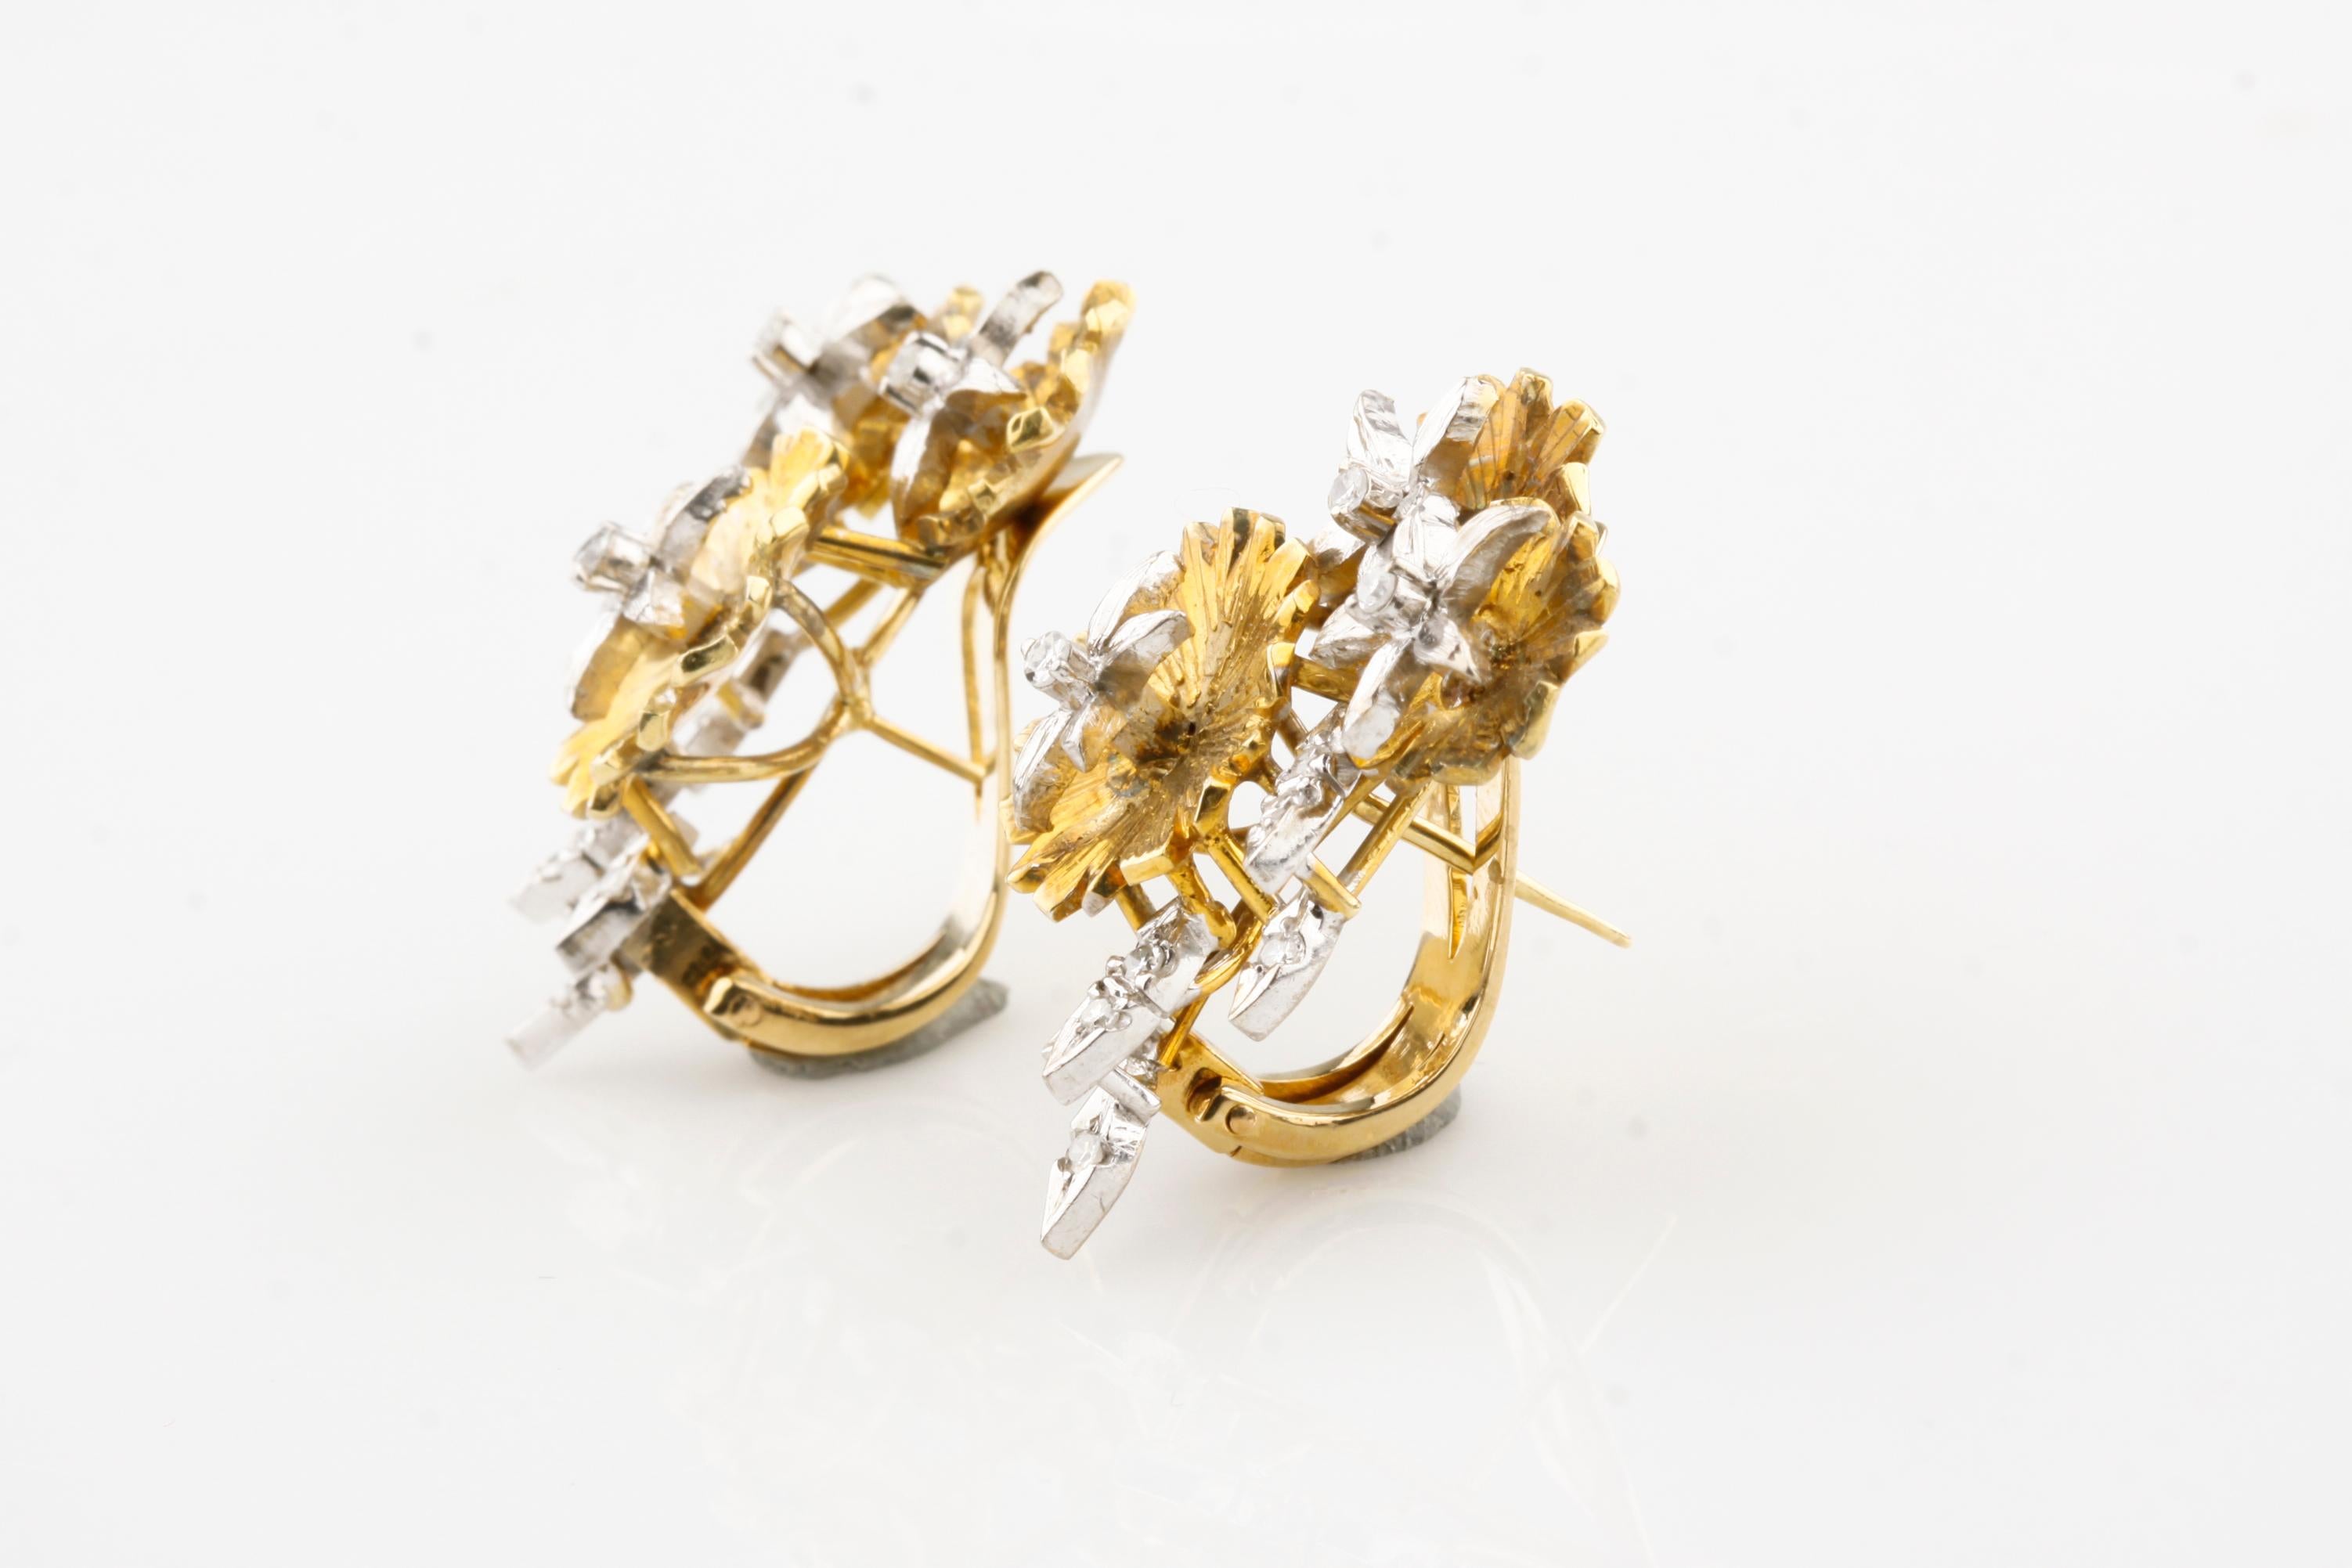 Gorgeous Flower Drop Earrings
Feature three yellow gold blossoms with white gold diamond-studded stamens and leaves
Total Diamond Weight = Appx 0.30 Cts
Total Length of Earrings = 28 mm
Width of Earrings = 20 mm
Total Mass = 16.6 grams
Gorgeous Gift!